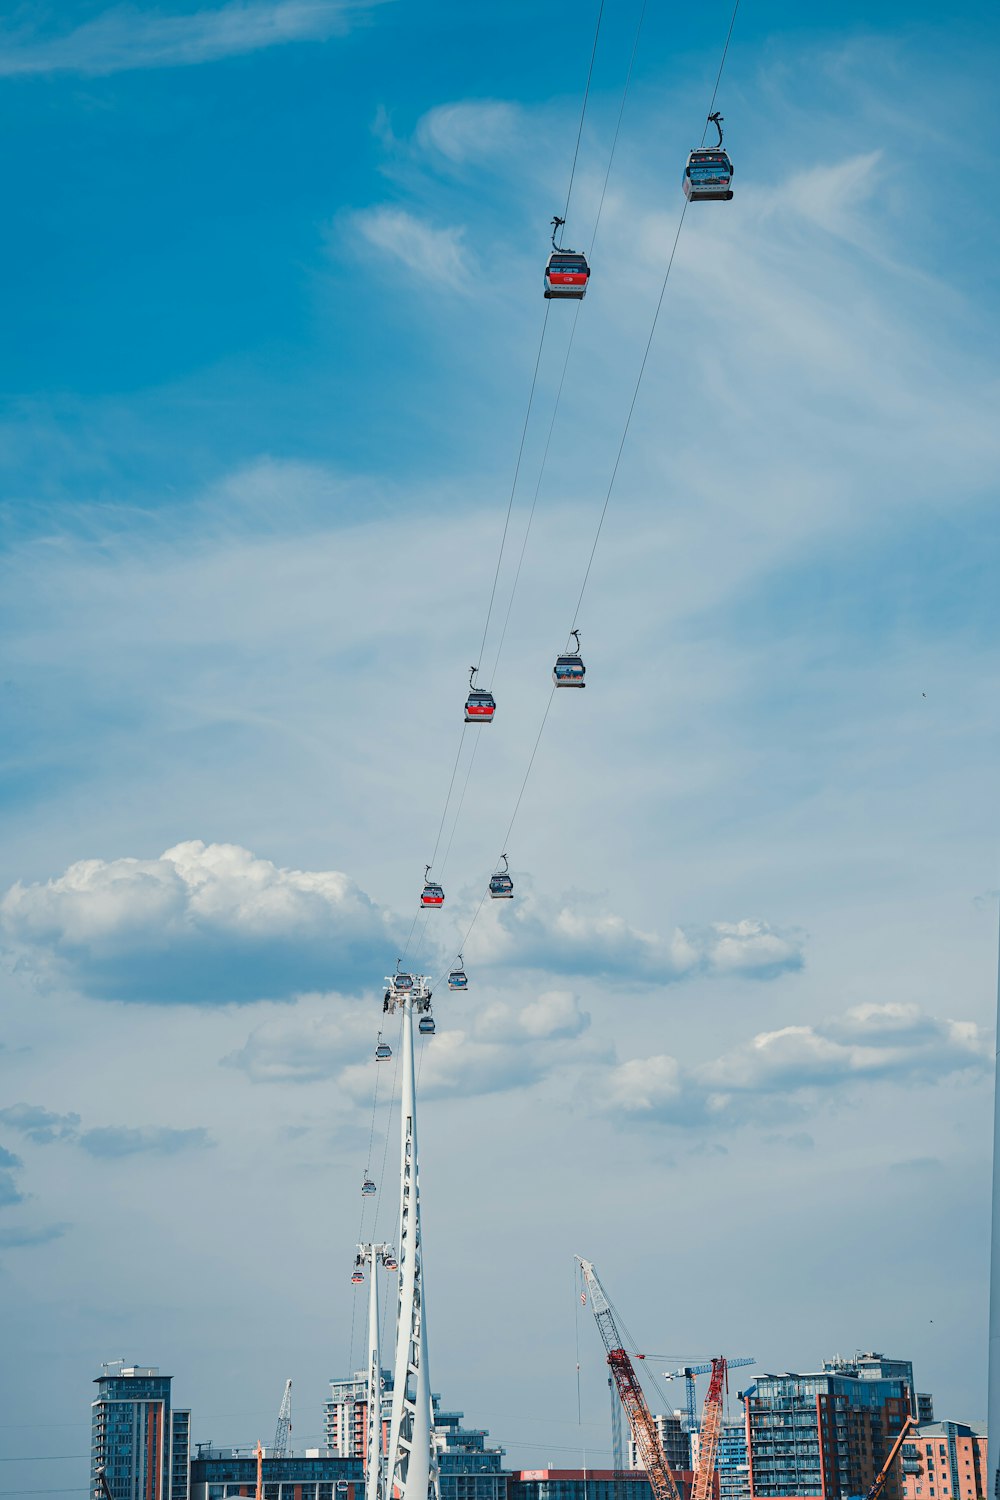 a group of people riding on a cable car